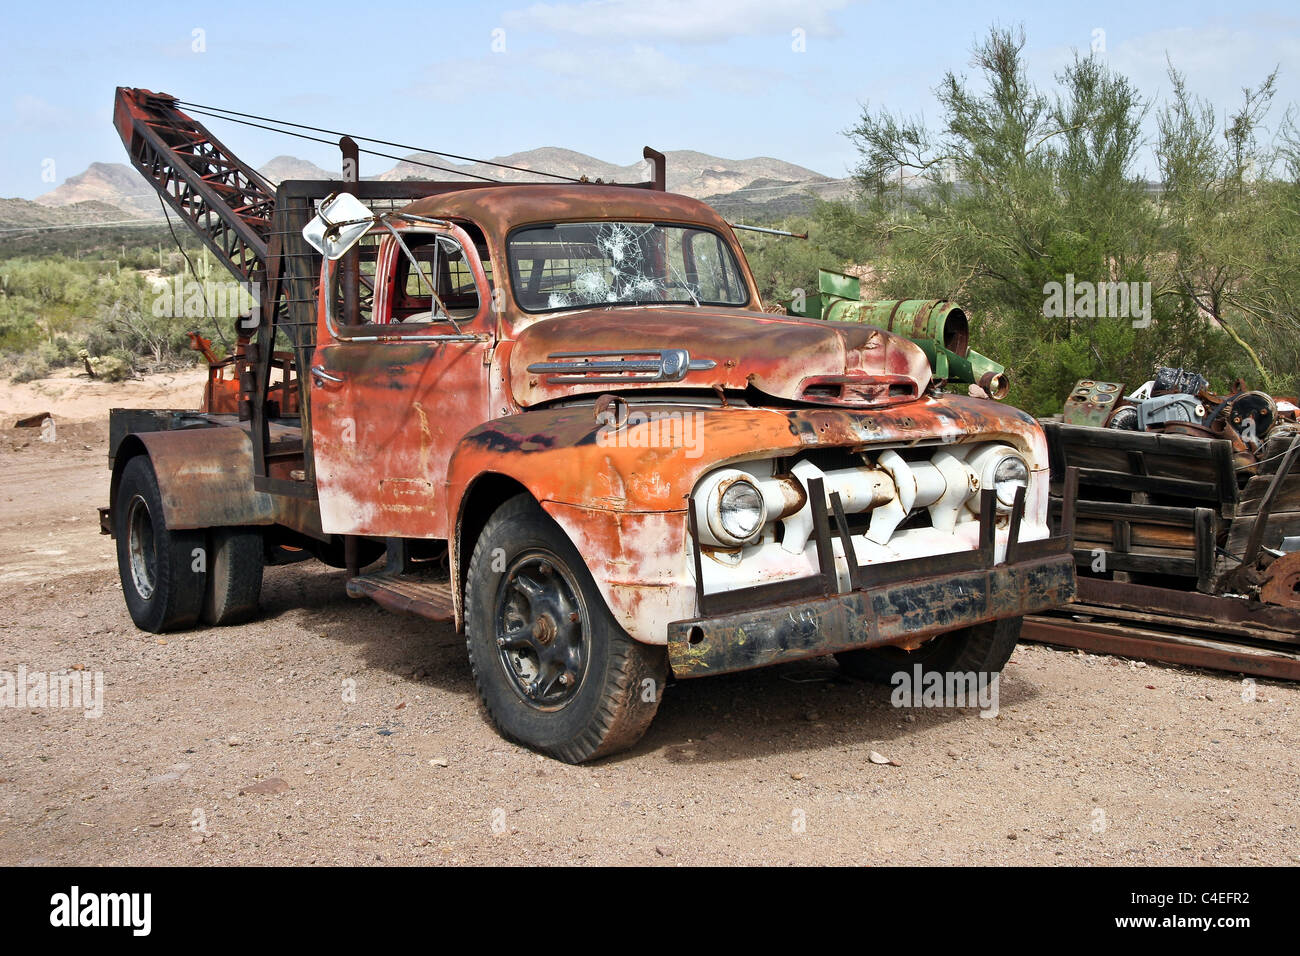 Cars film tow mater Cut Out Stock Images & Pictures - Alamy